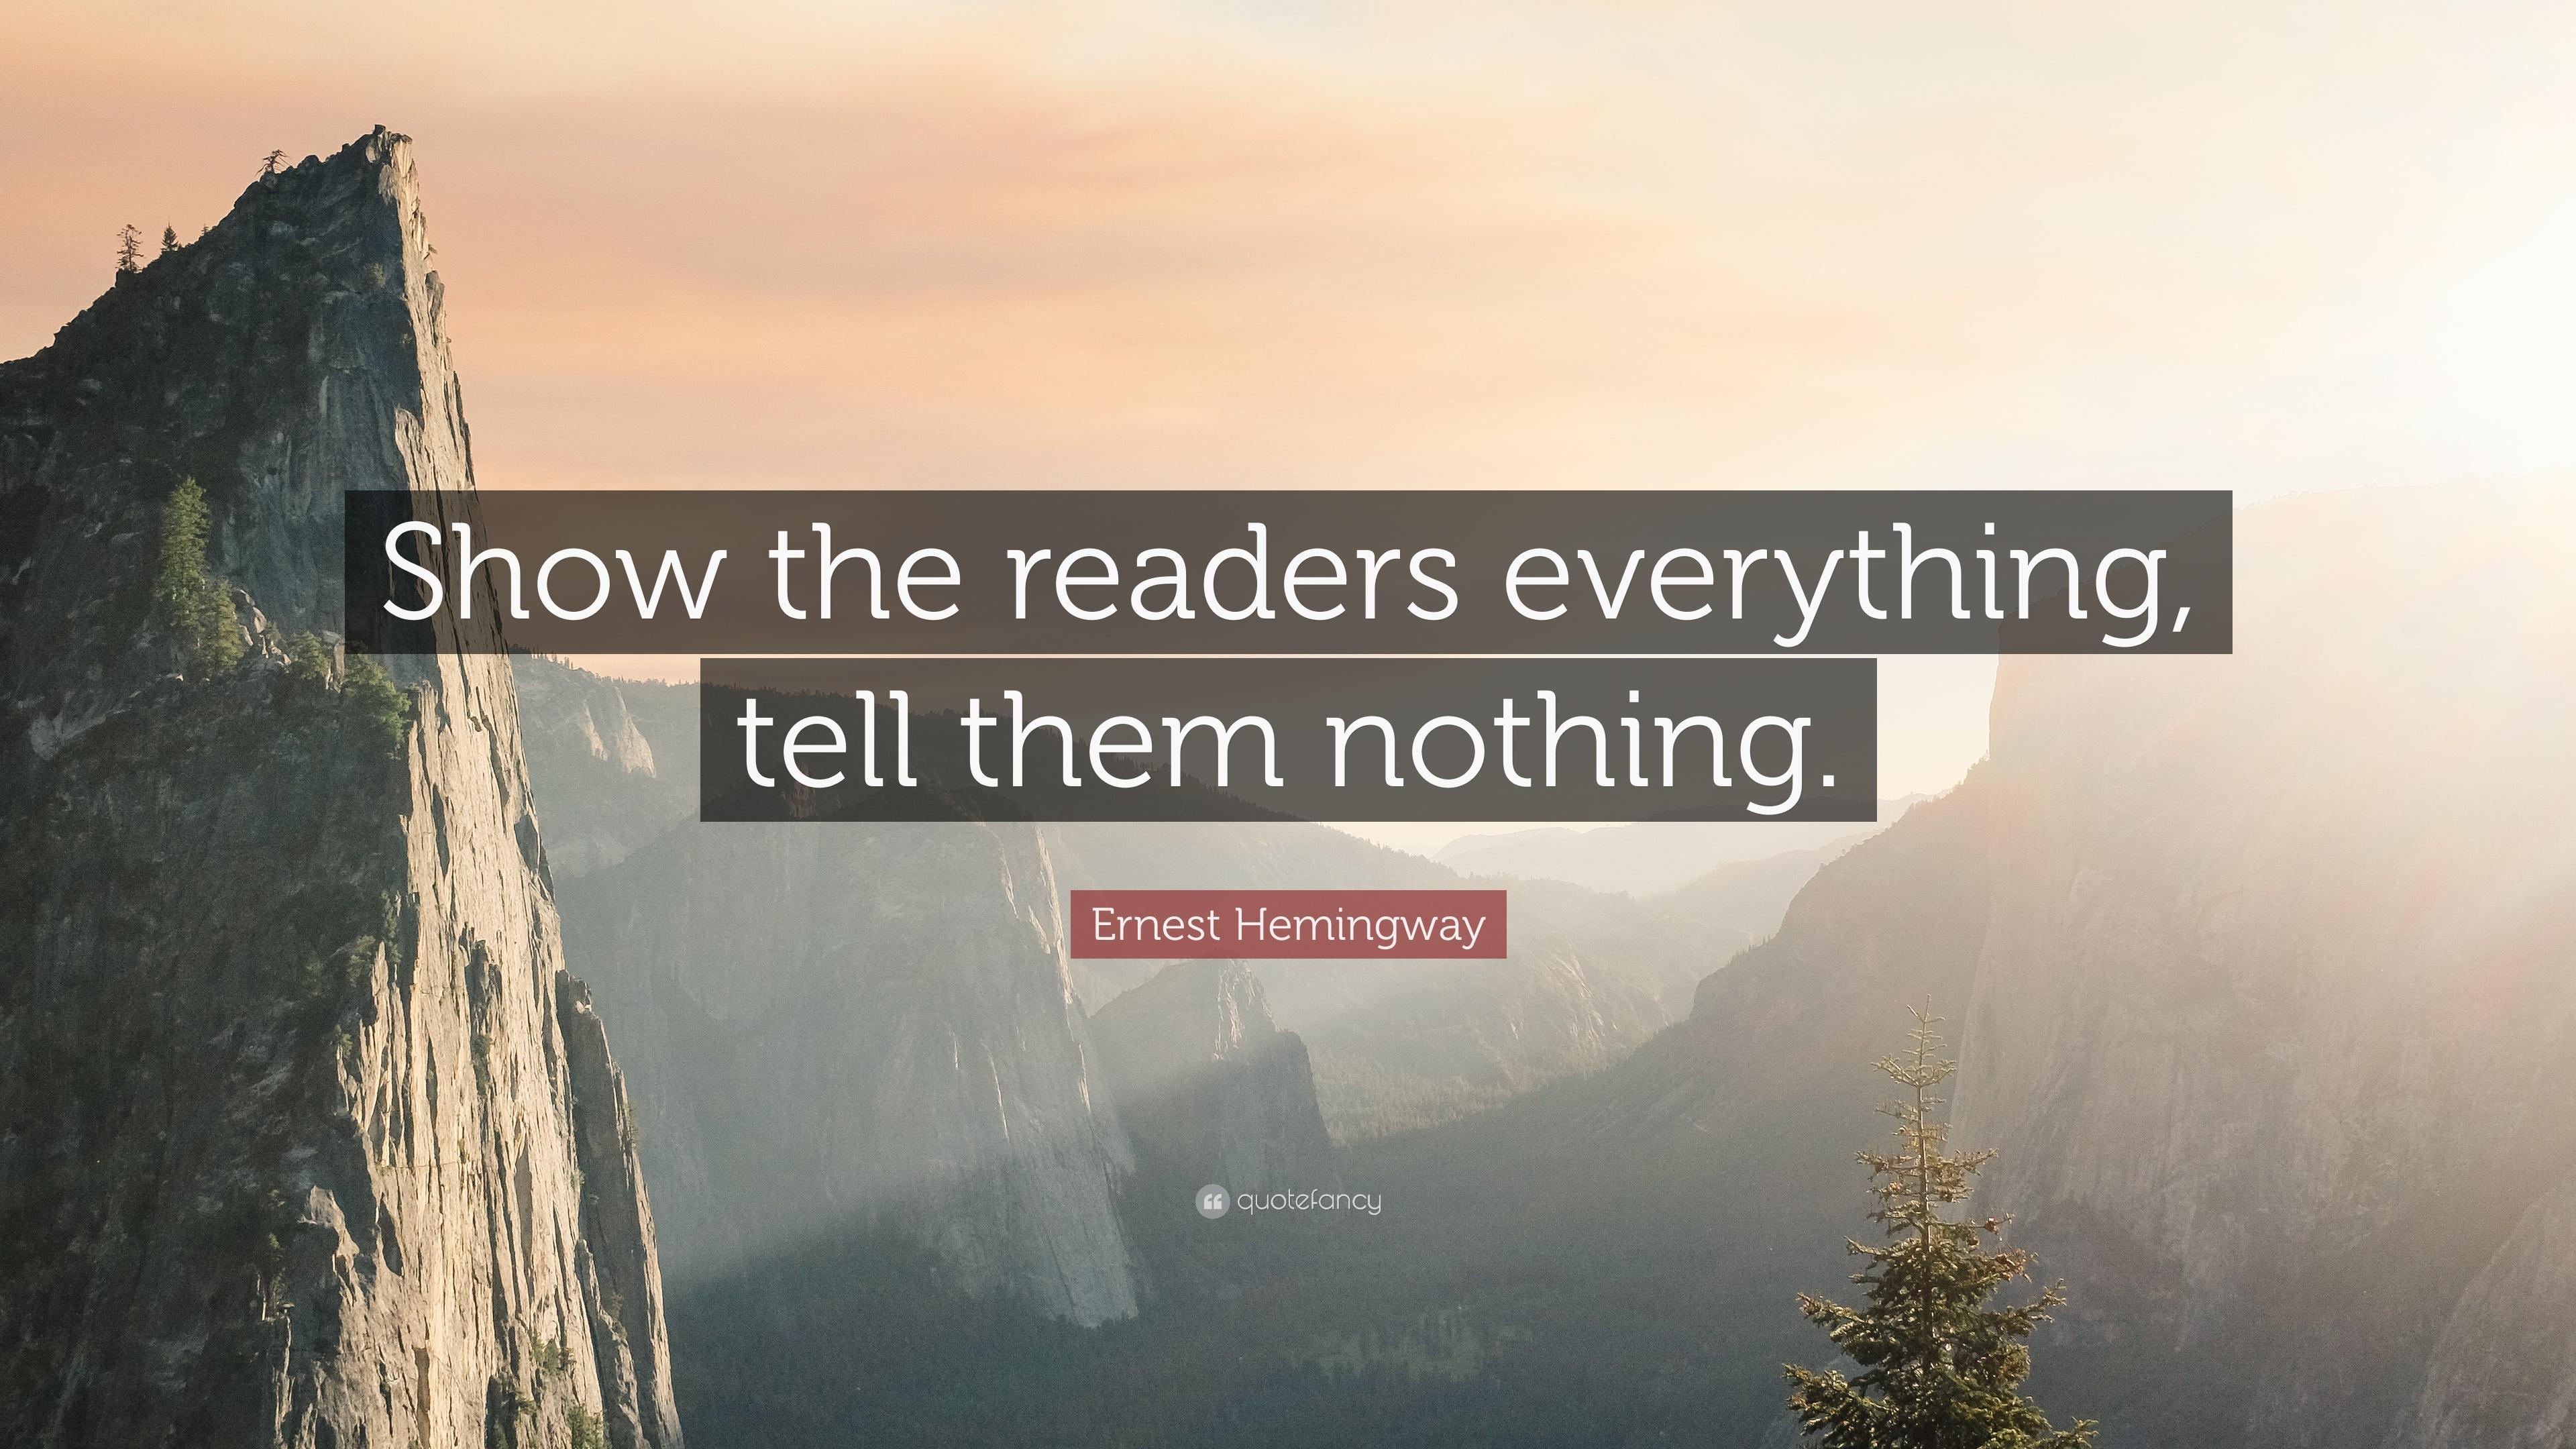 Ernest Hemingway Quote: “Show the readers everything, tell